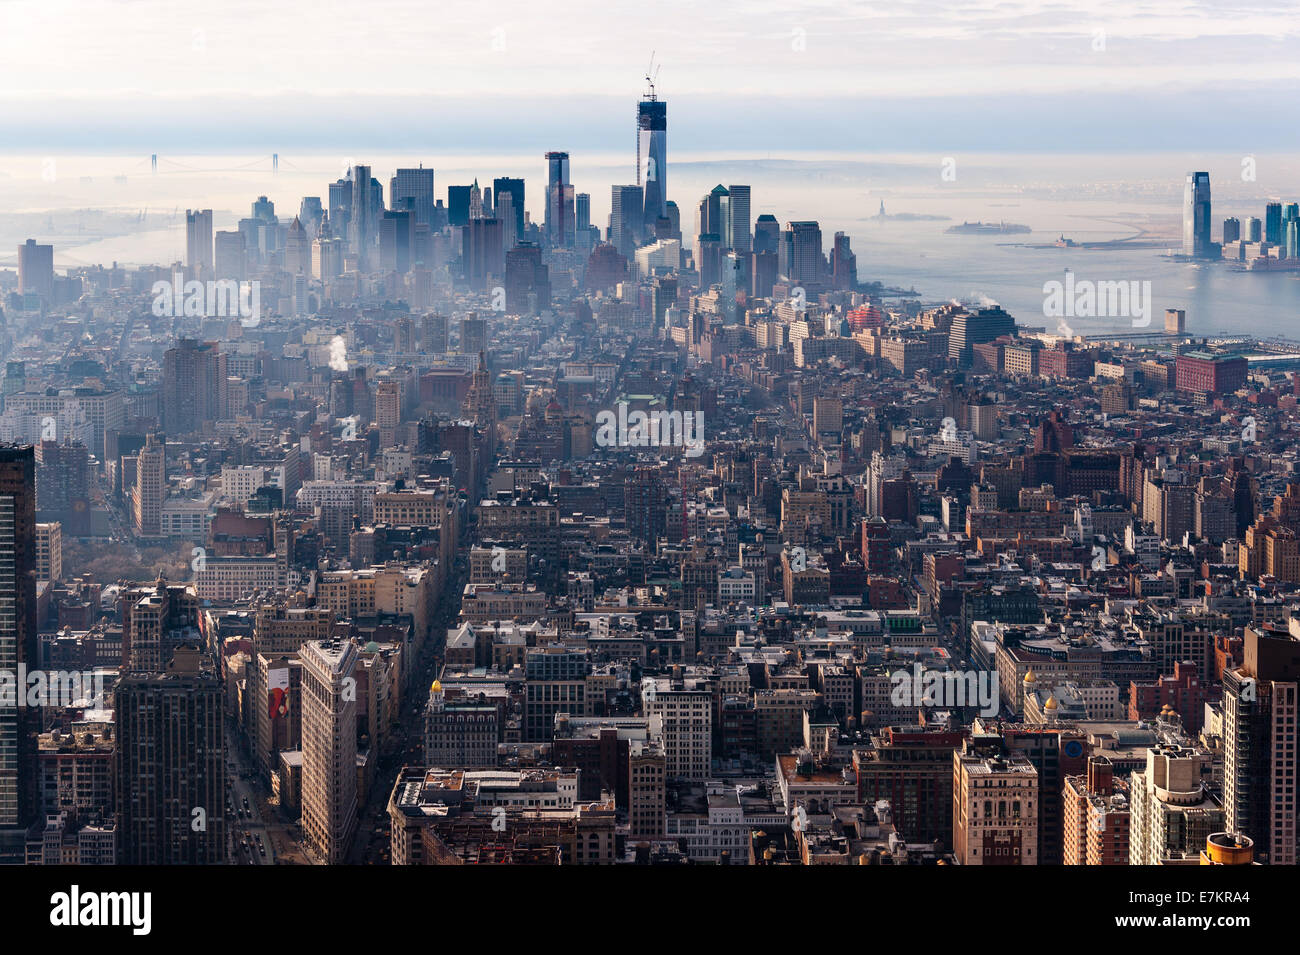 Noi, New York City. Vista dall'Empire State Building observation deck. Foto Stock